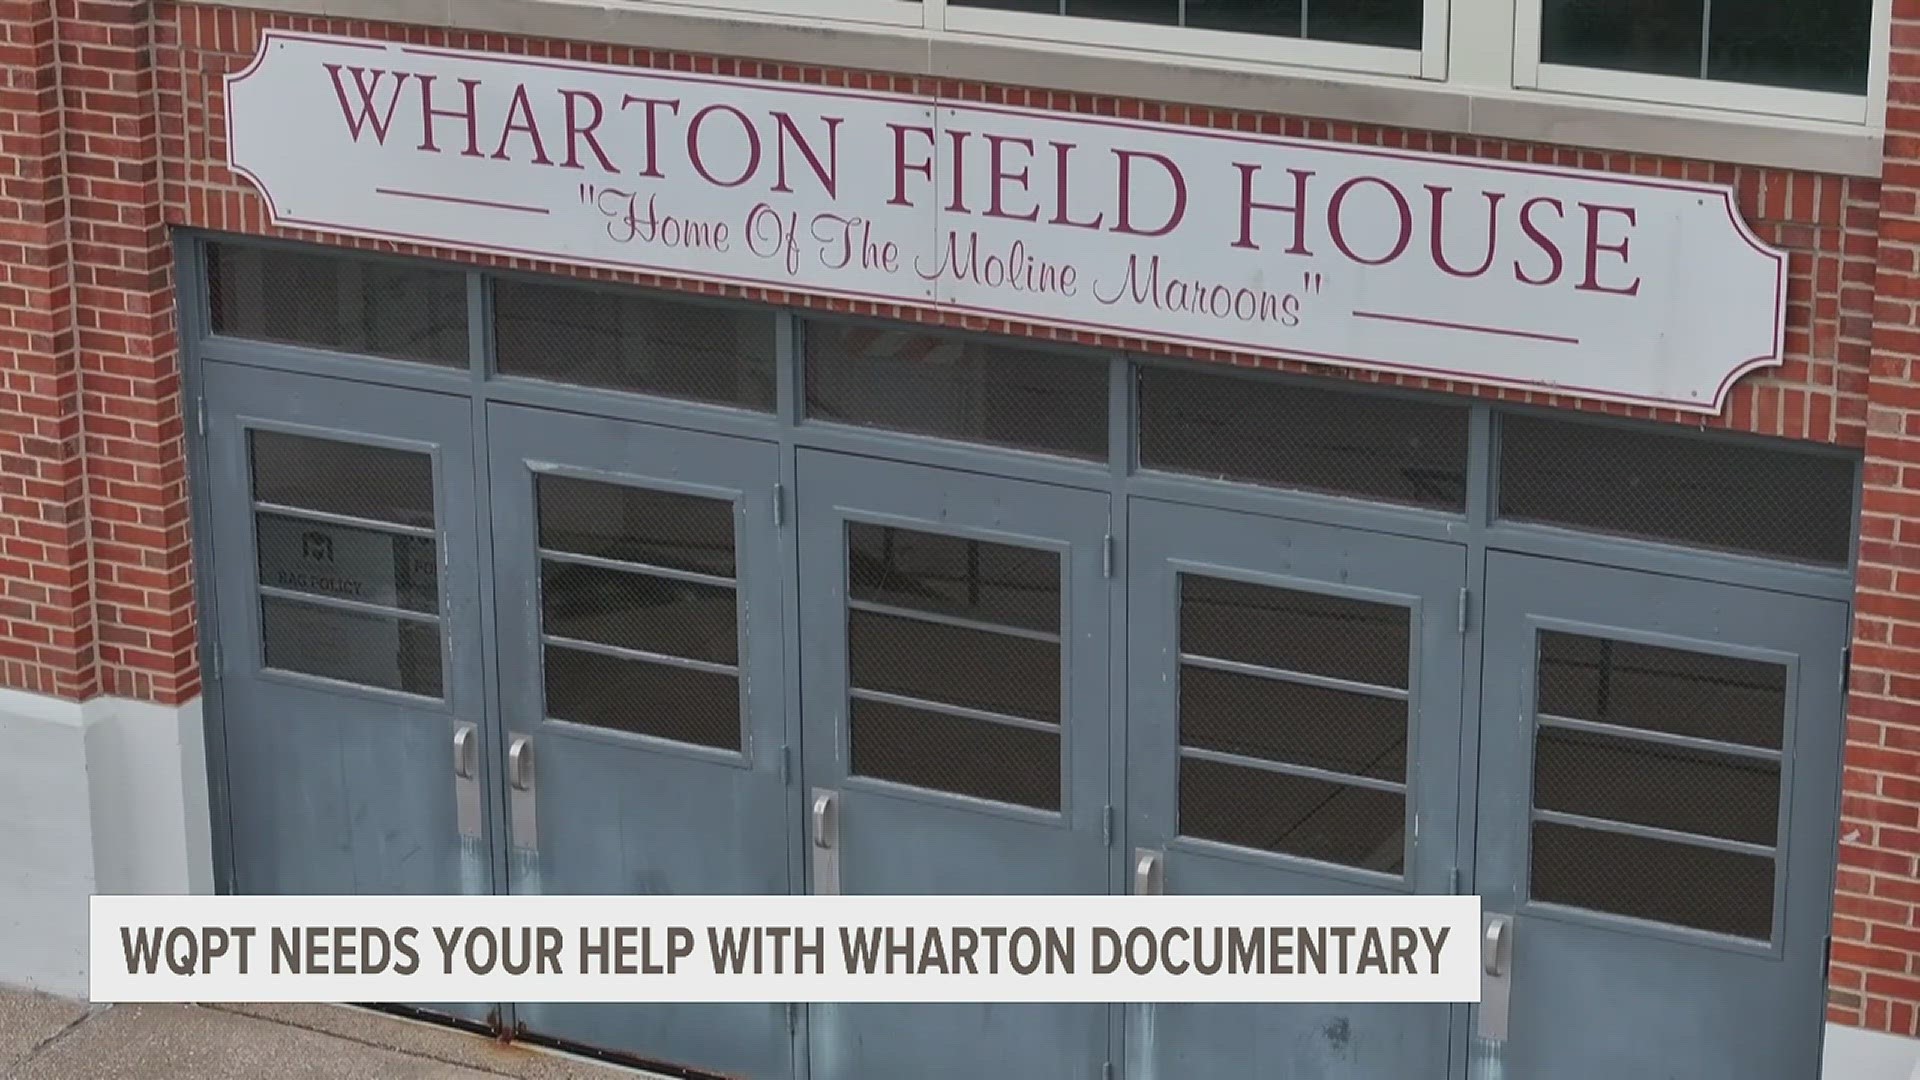 WQPT will premiere the documentary at the end of April. Before then, the public is asked to submit their Wharton photos, memorabilia, artifacts and memories.